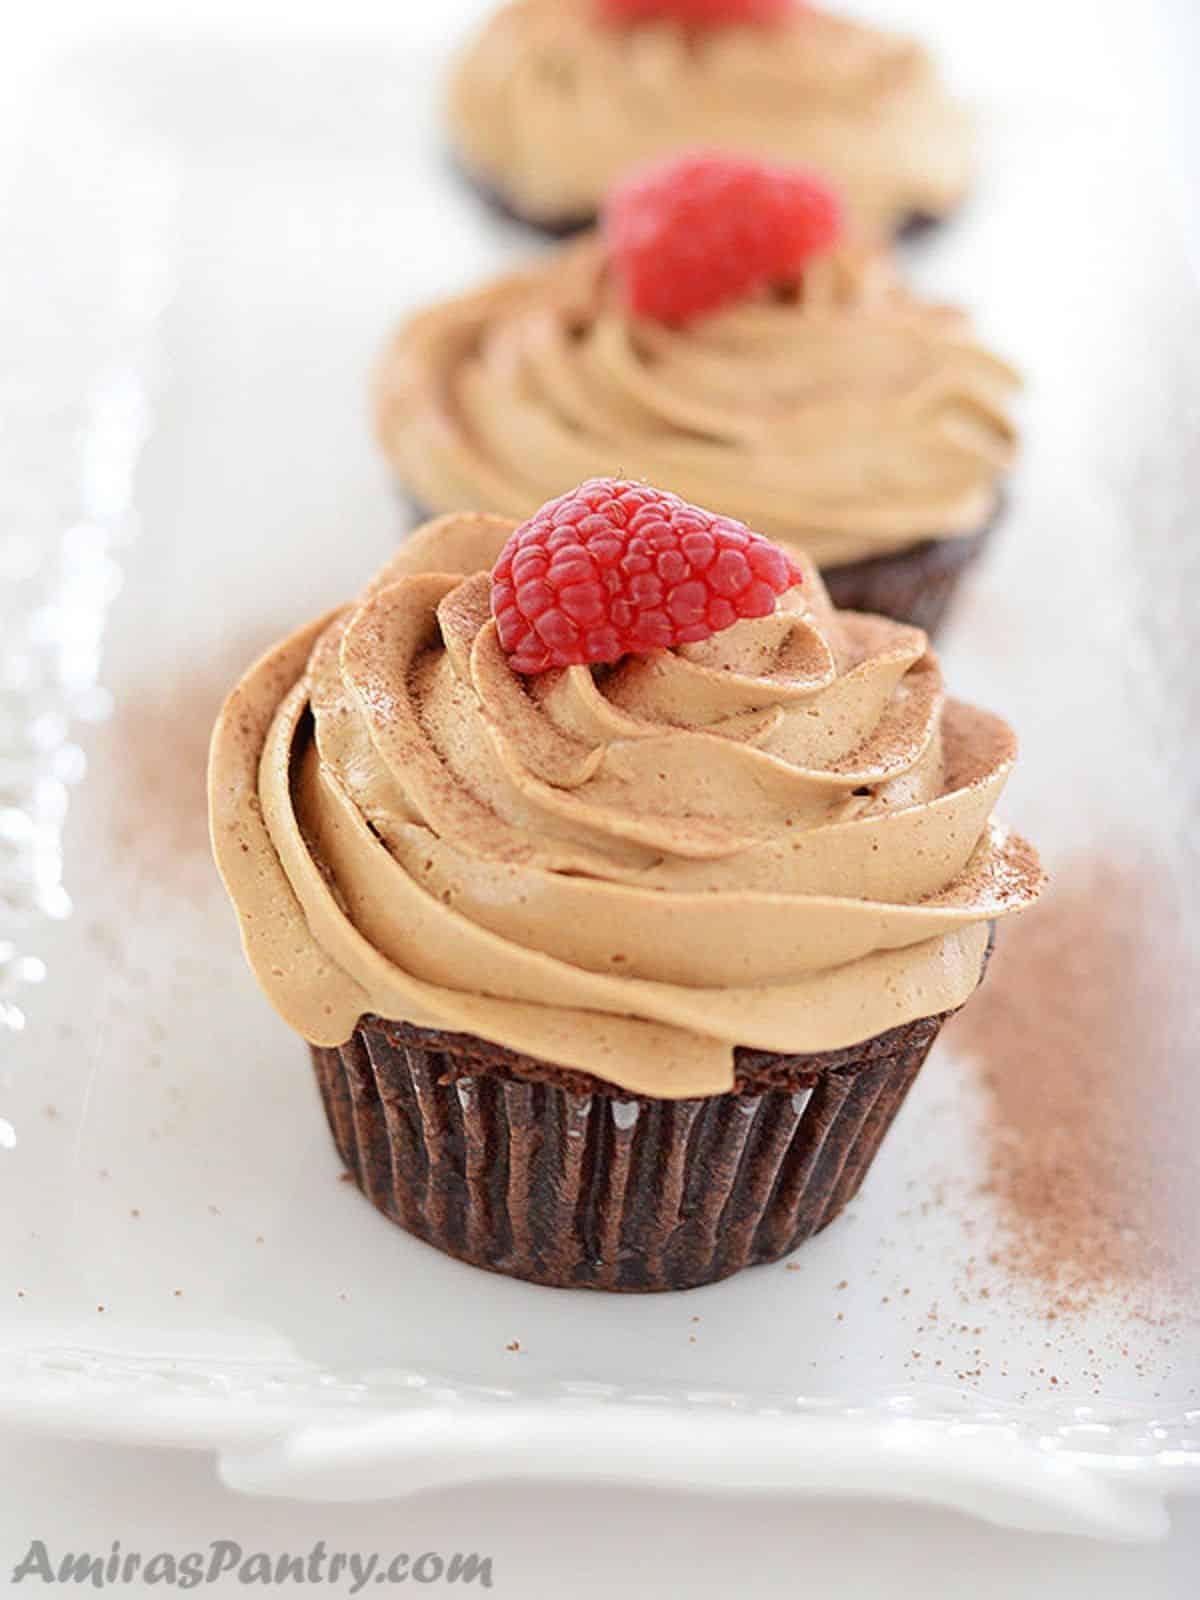 Coffee cupcakes placed on a white serving platter topped with raspberries.